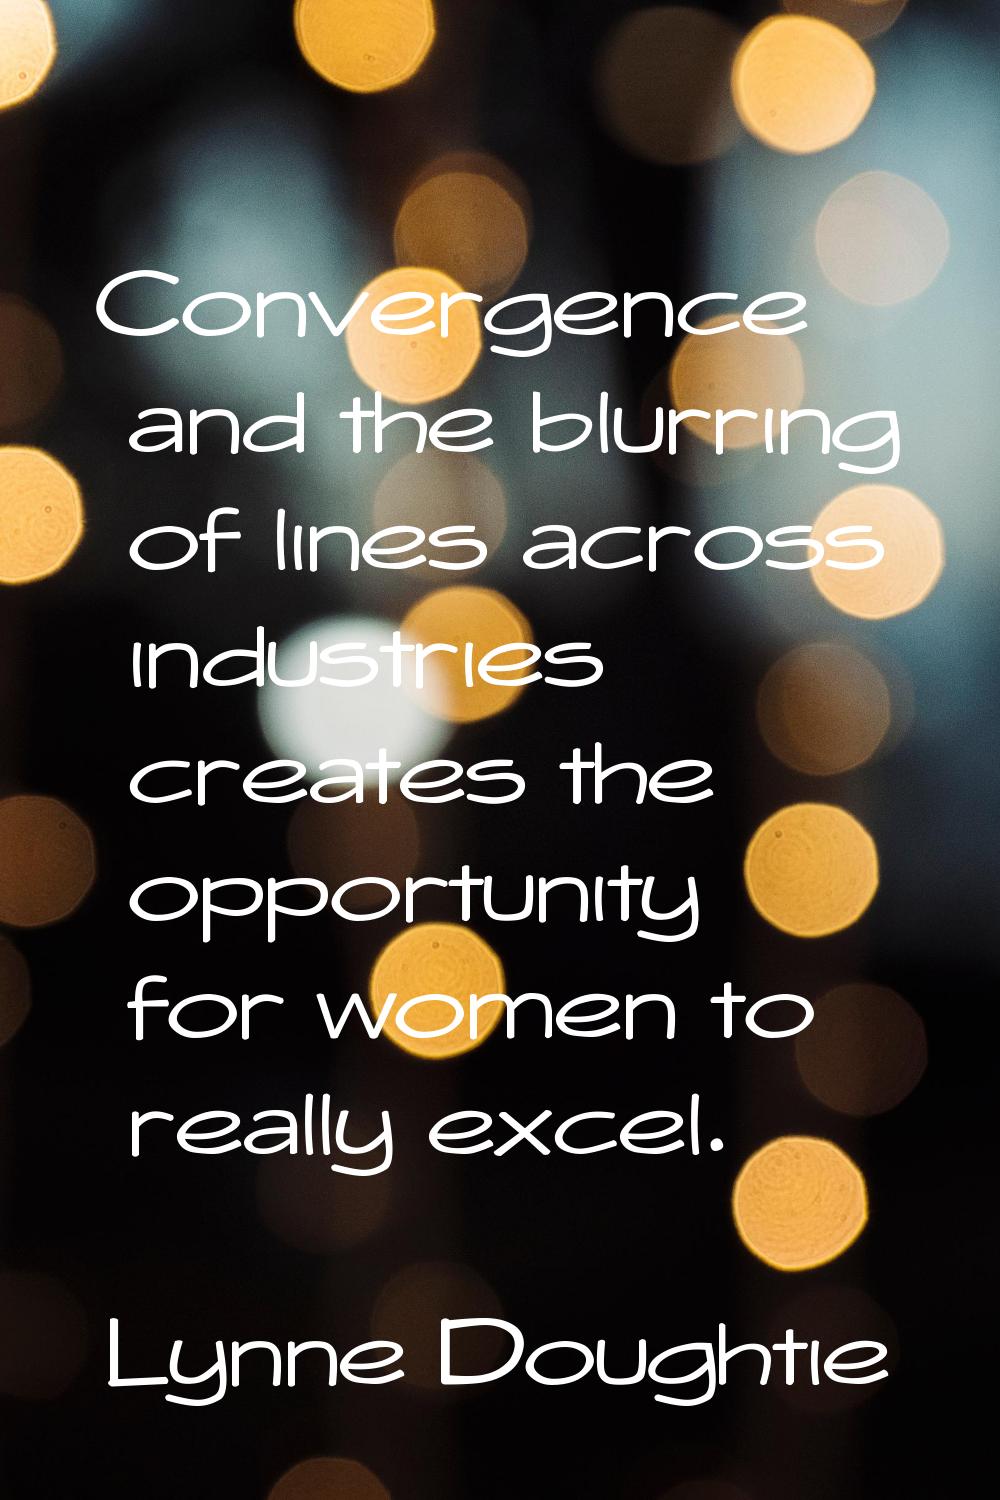 Convergence and the blurring of lines across industries creates the opportunity for women to really